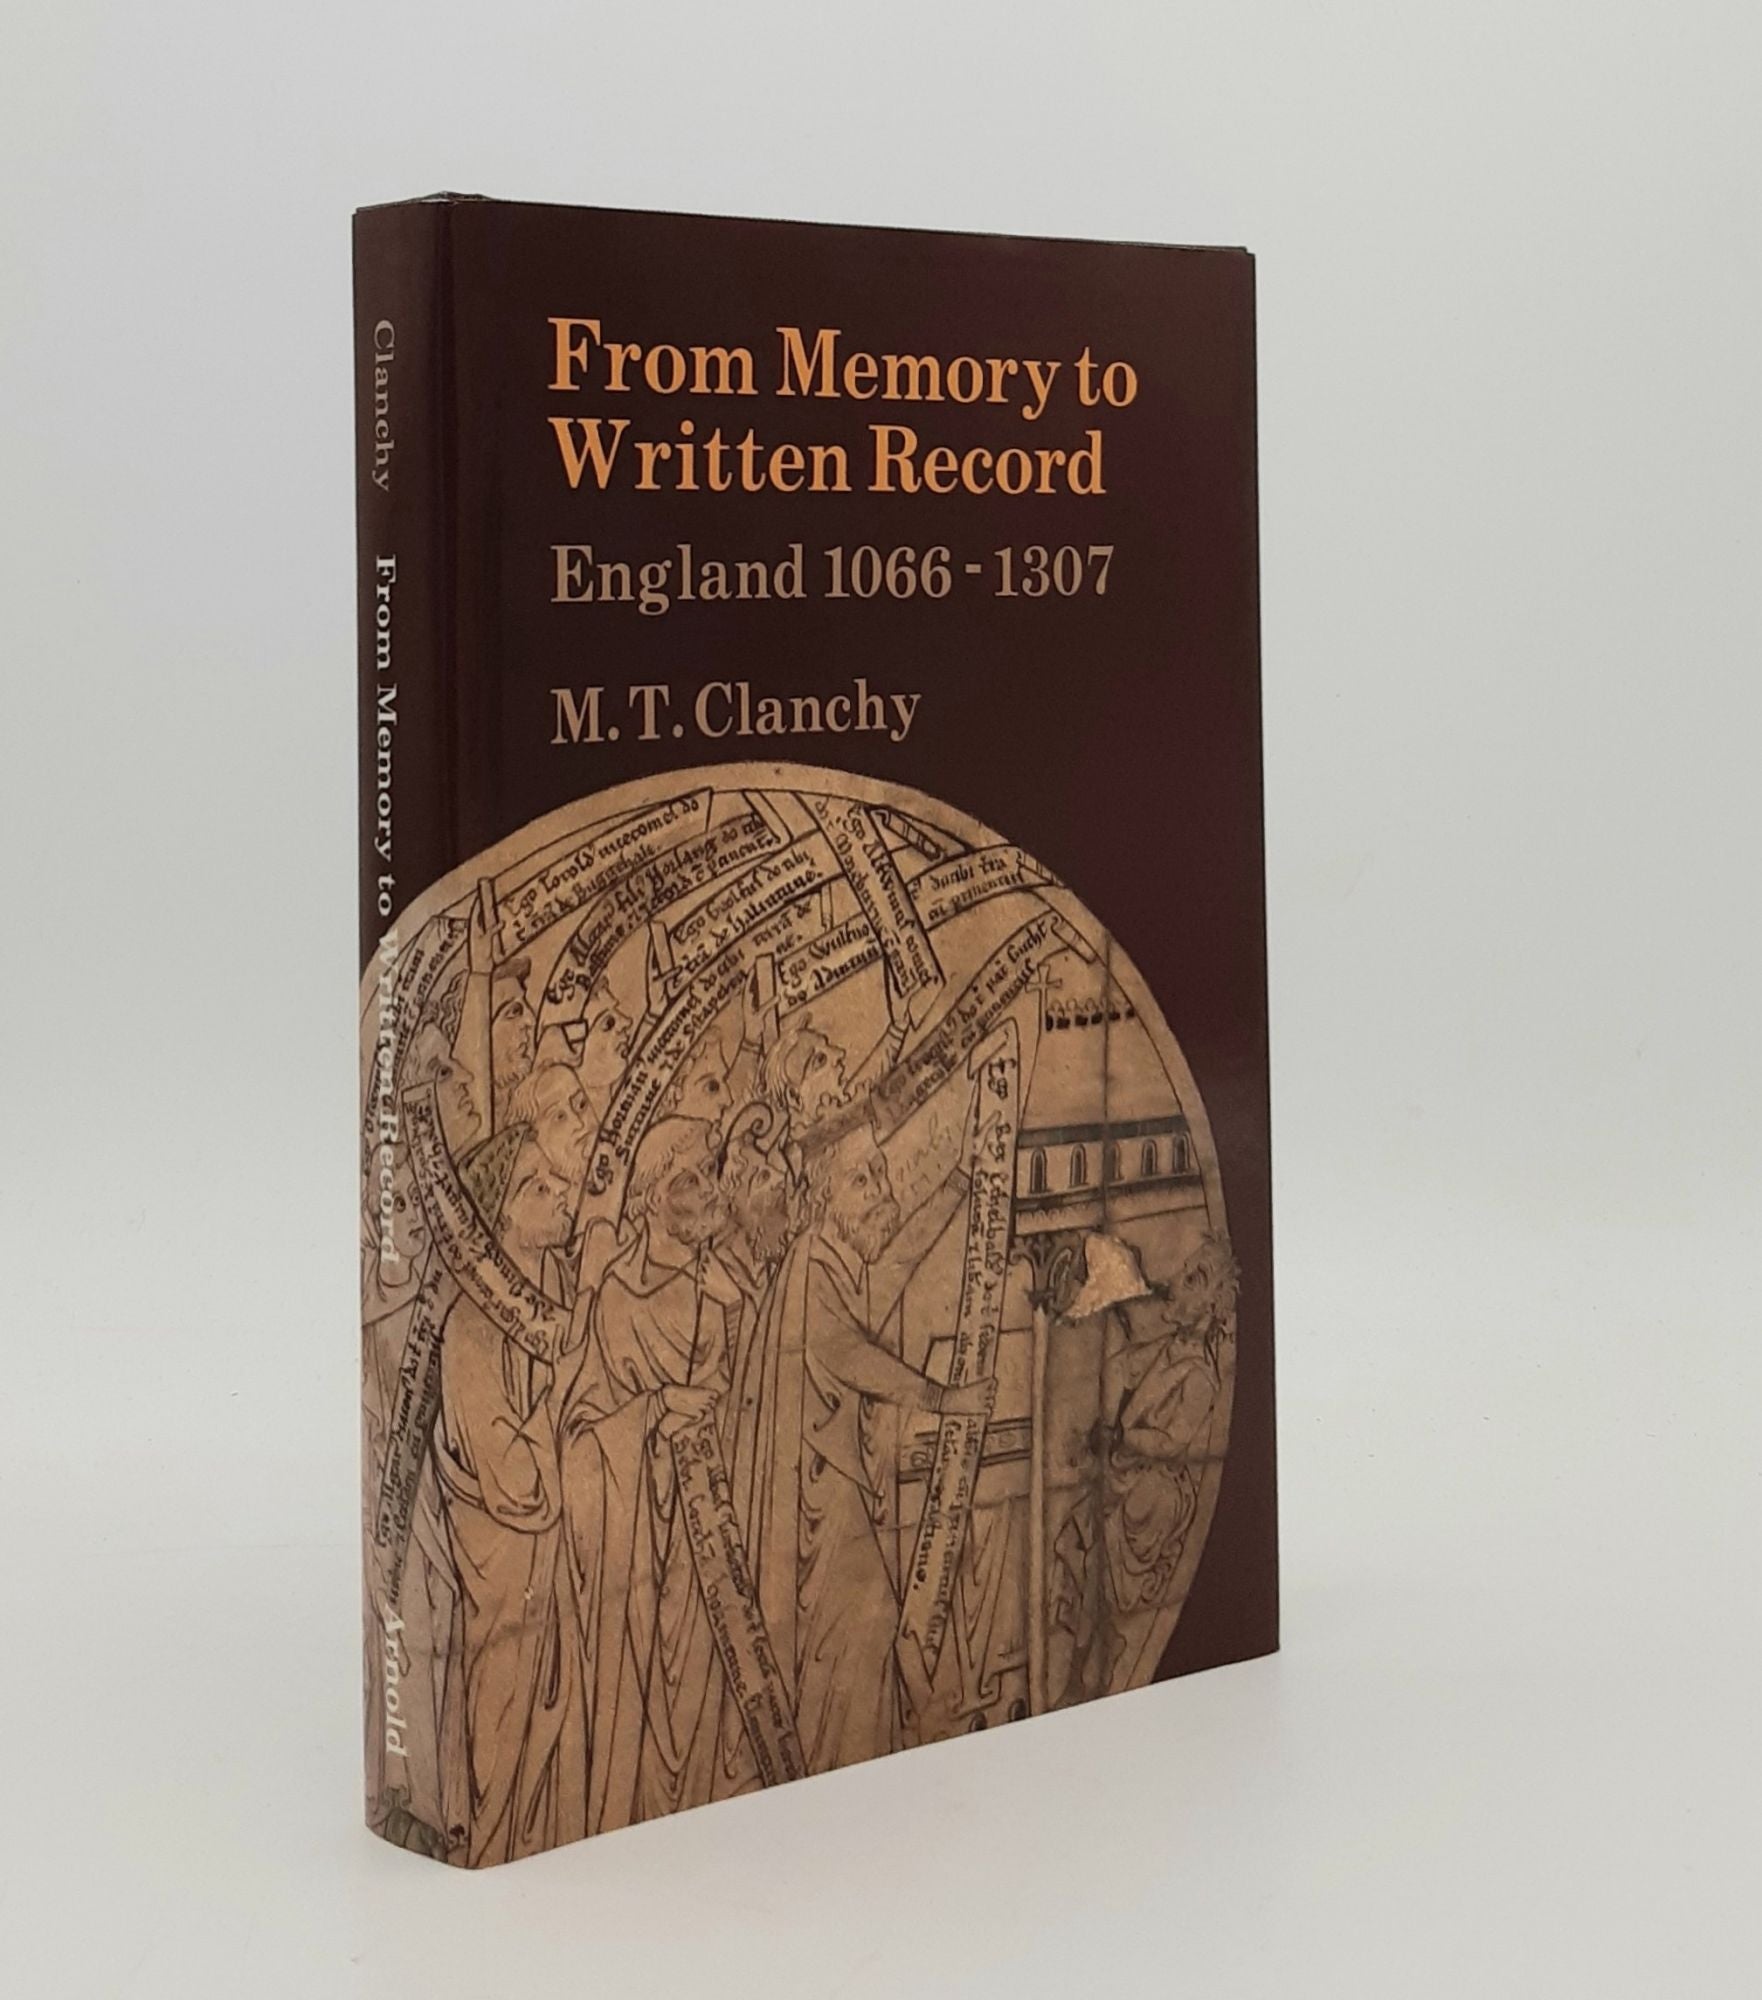 CLANCHY M.T. - From Memory to Written Record England 1066-1307